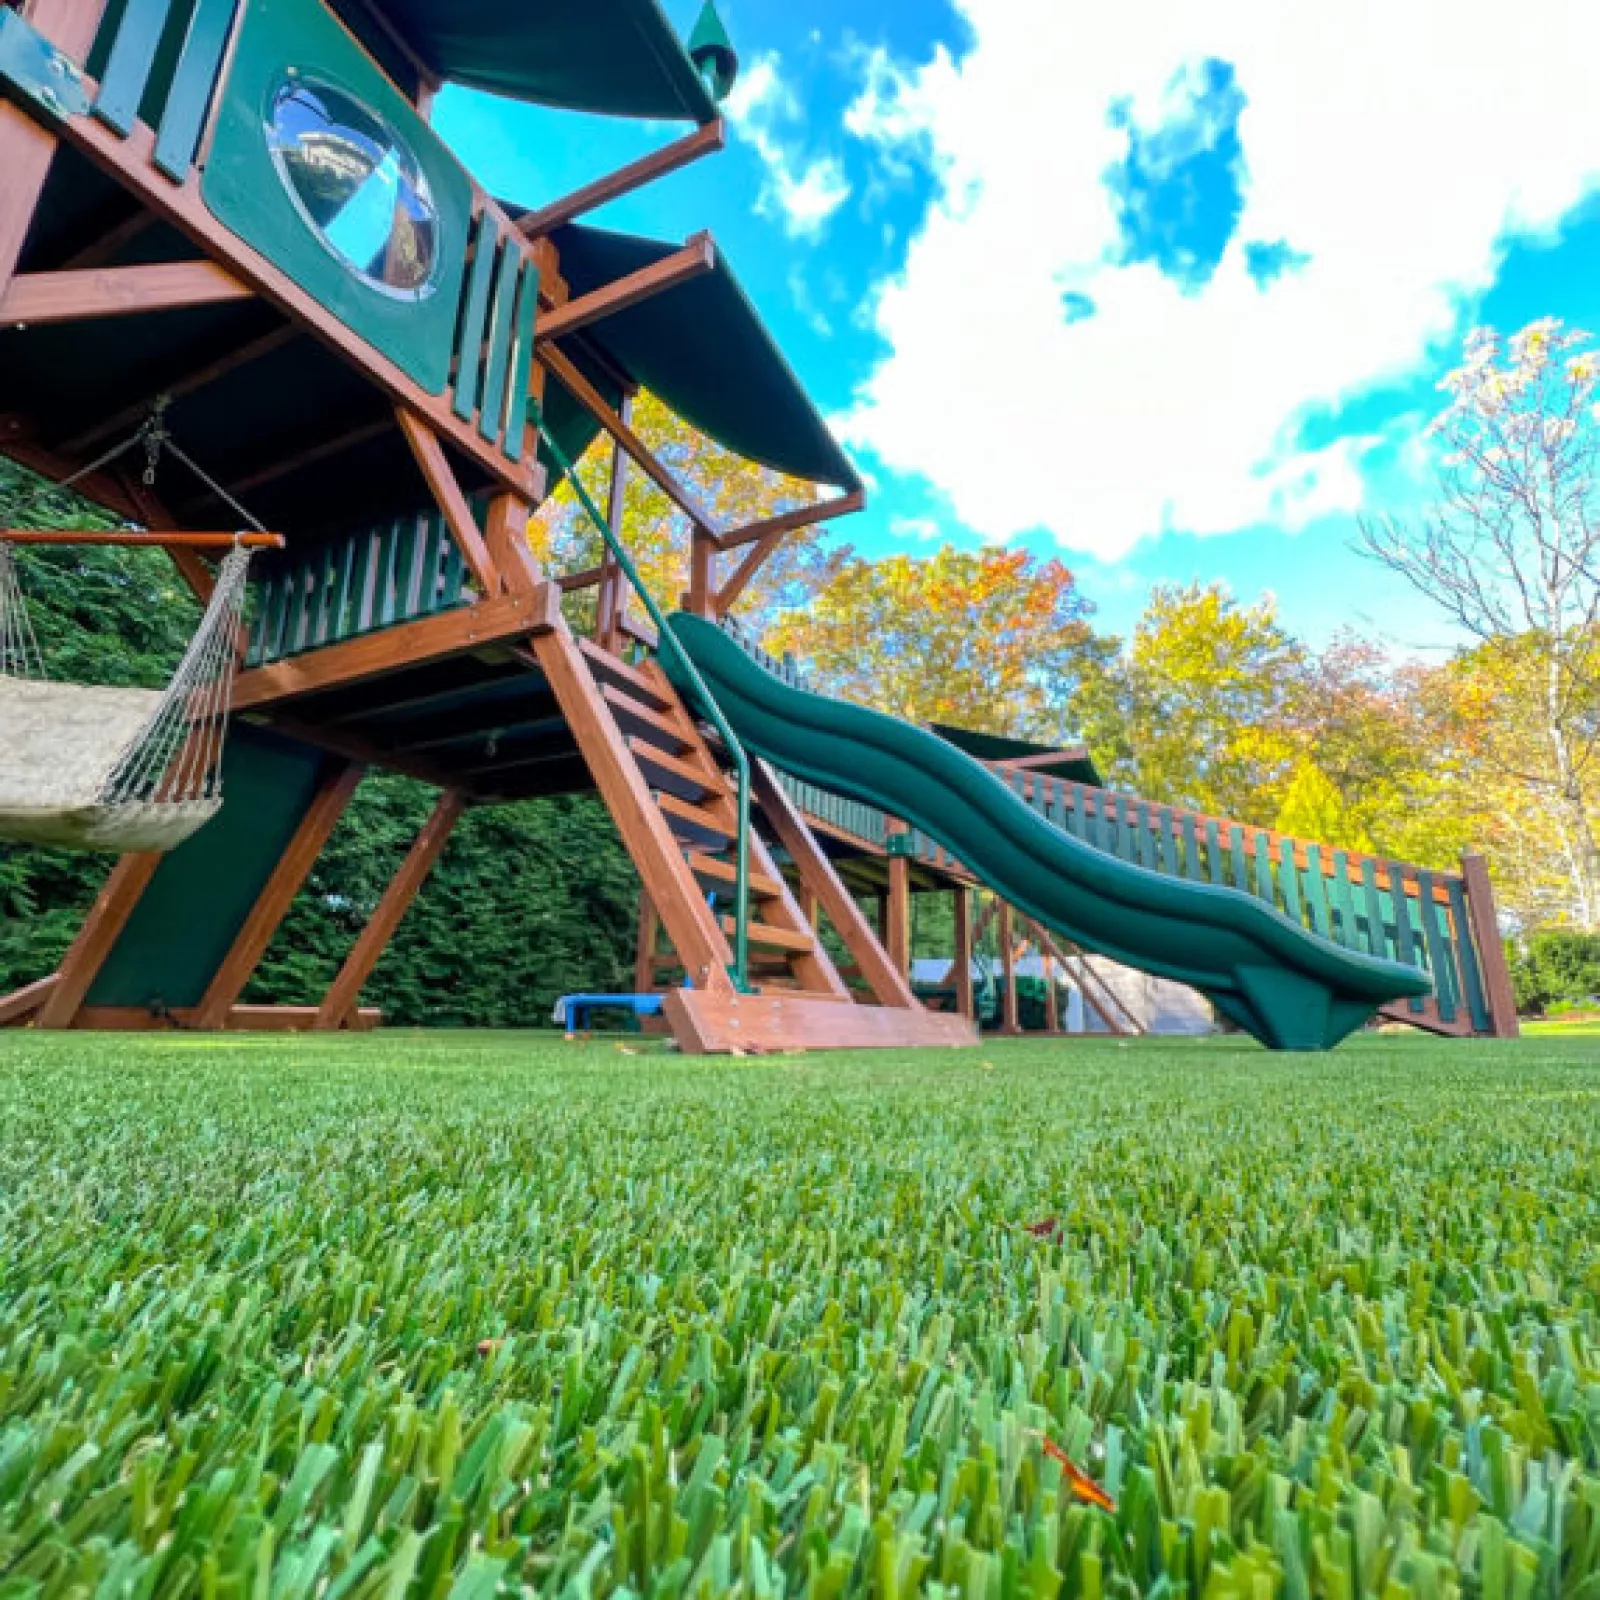 a slide in a grassy area